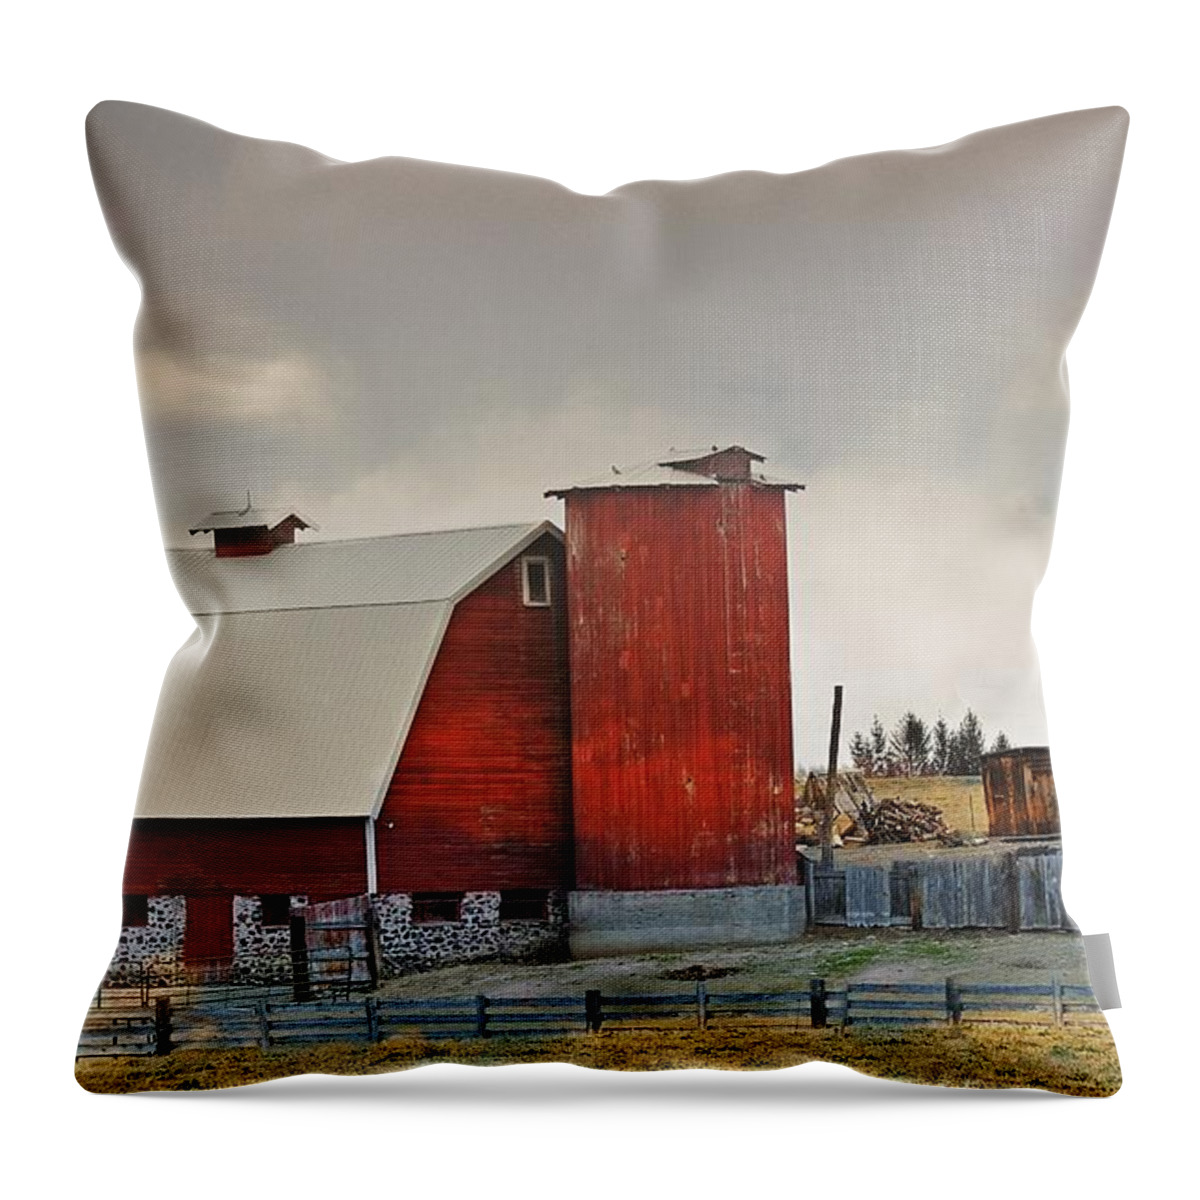 Barn Throw Pillow featuring the photograph Red Barn by Image Takers Photography LLC - Laura Morgan and Carol Haddon